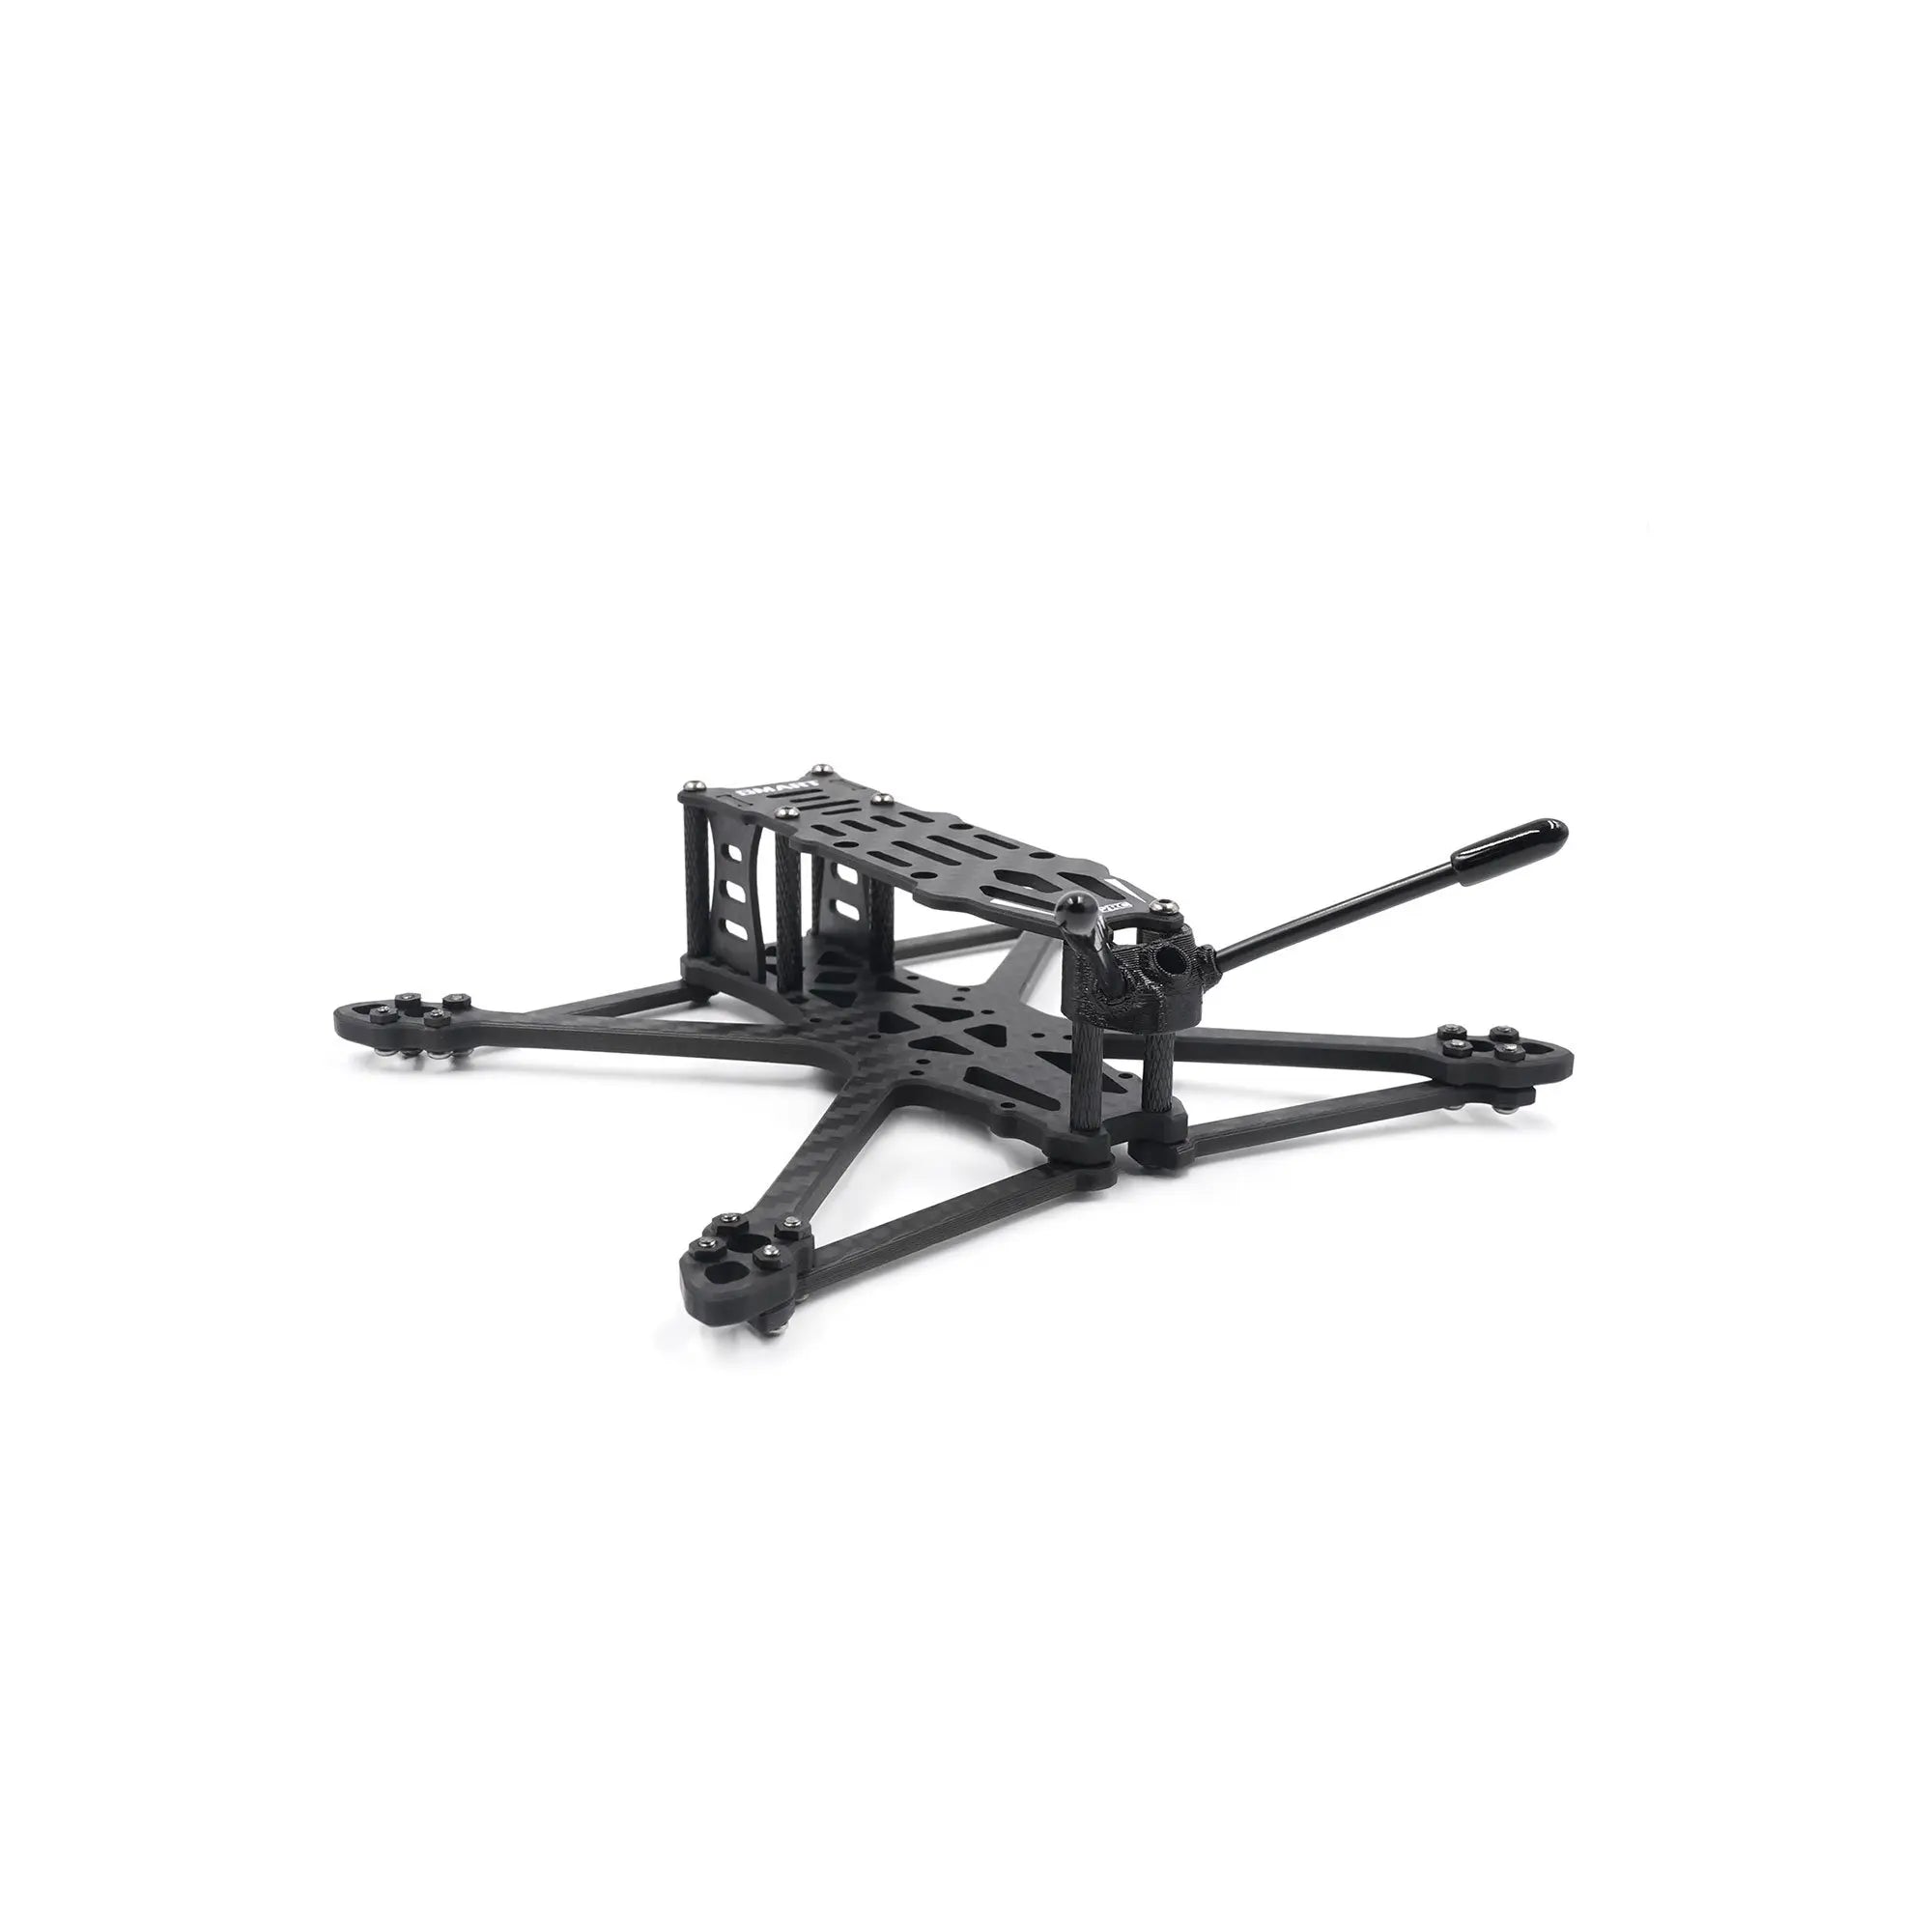 GEPRC GEP-ST35 Frame, geprc's GEP-ST35 is designed with small size, lightweight and